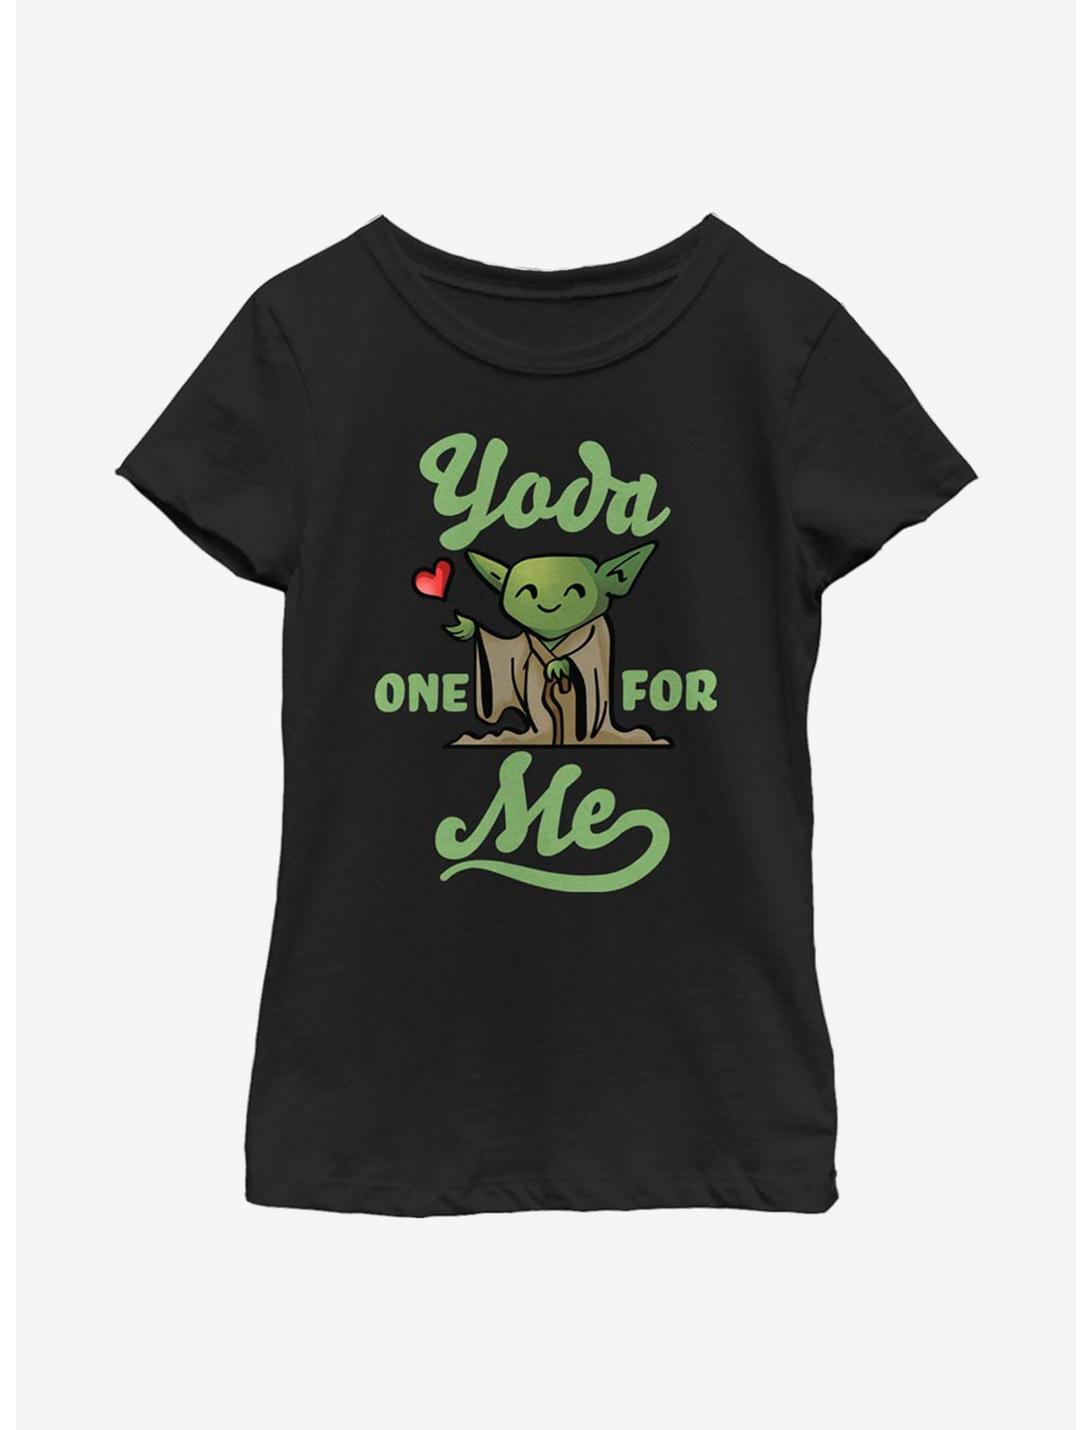 Star Wars Yoda One For Me Tiny Heart Youth Girls T-Shirt, BLACK, hi-res